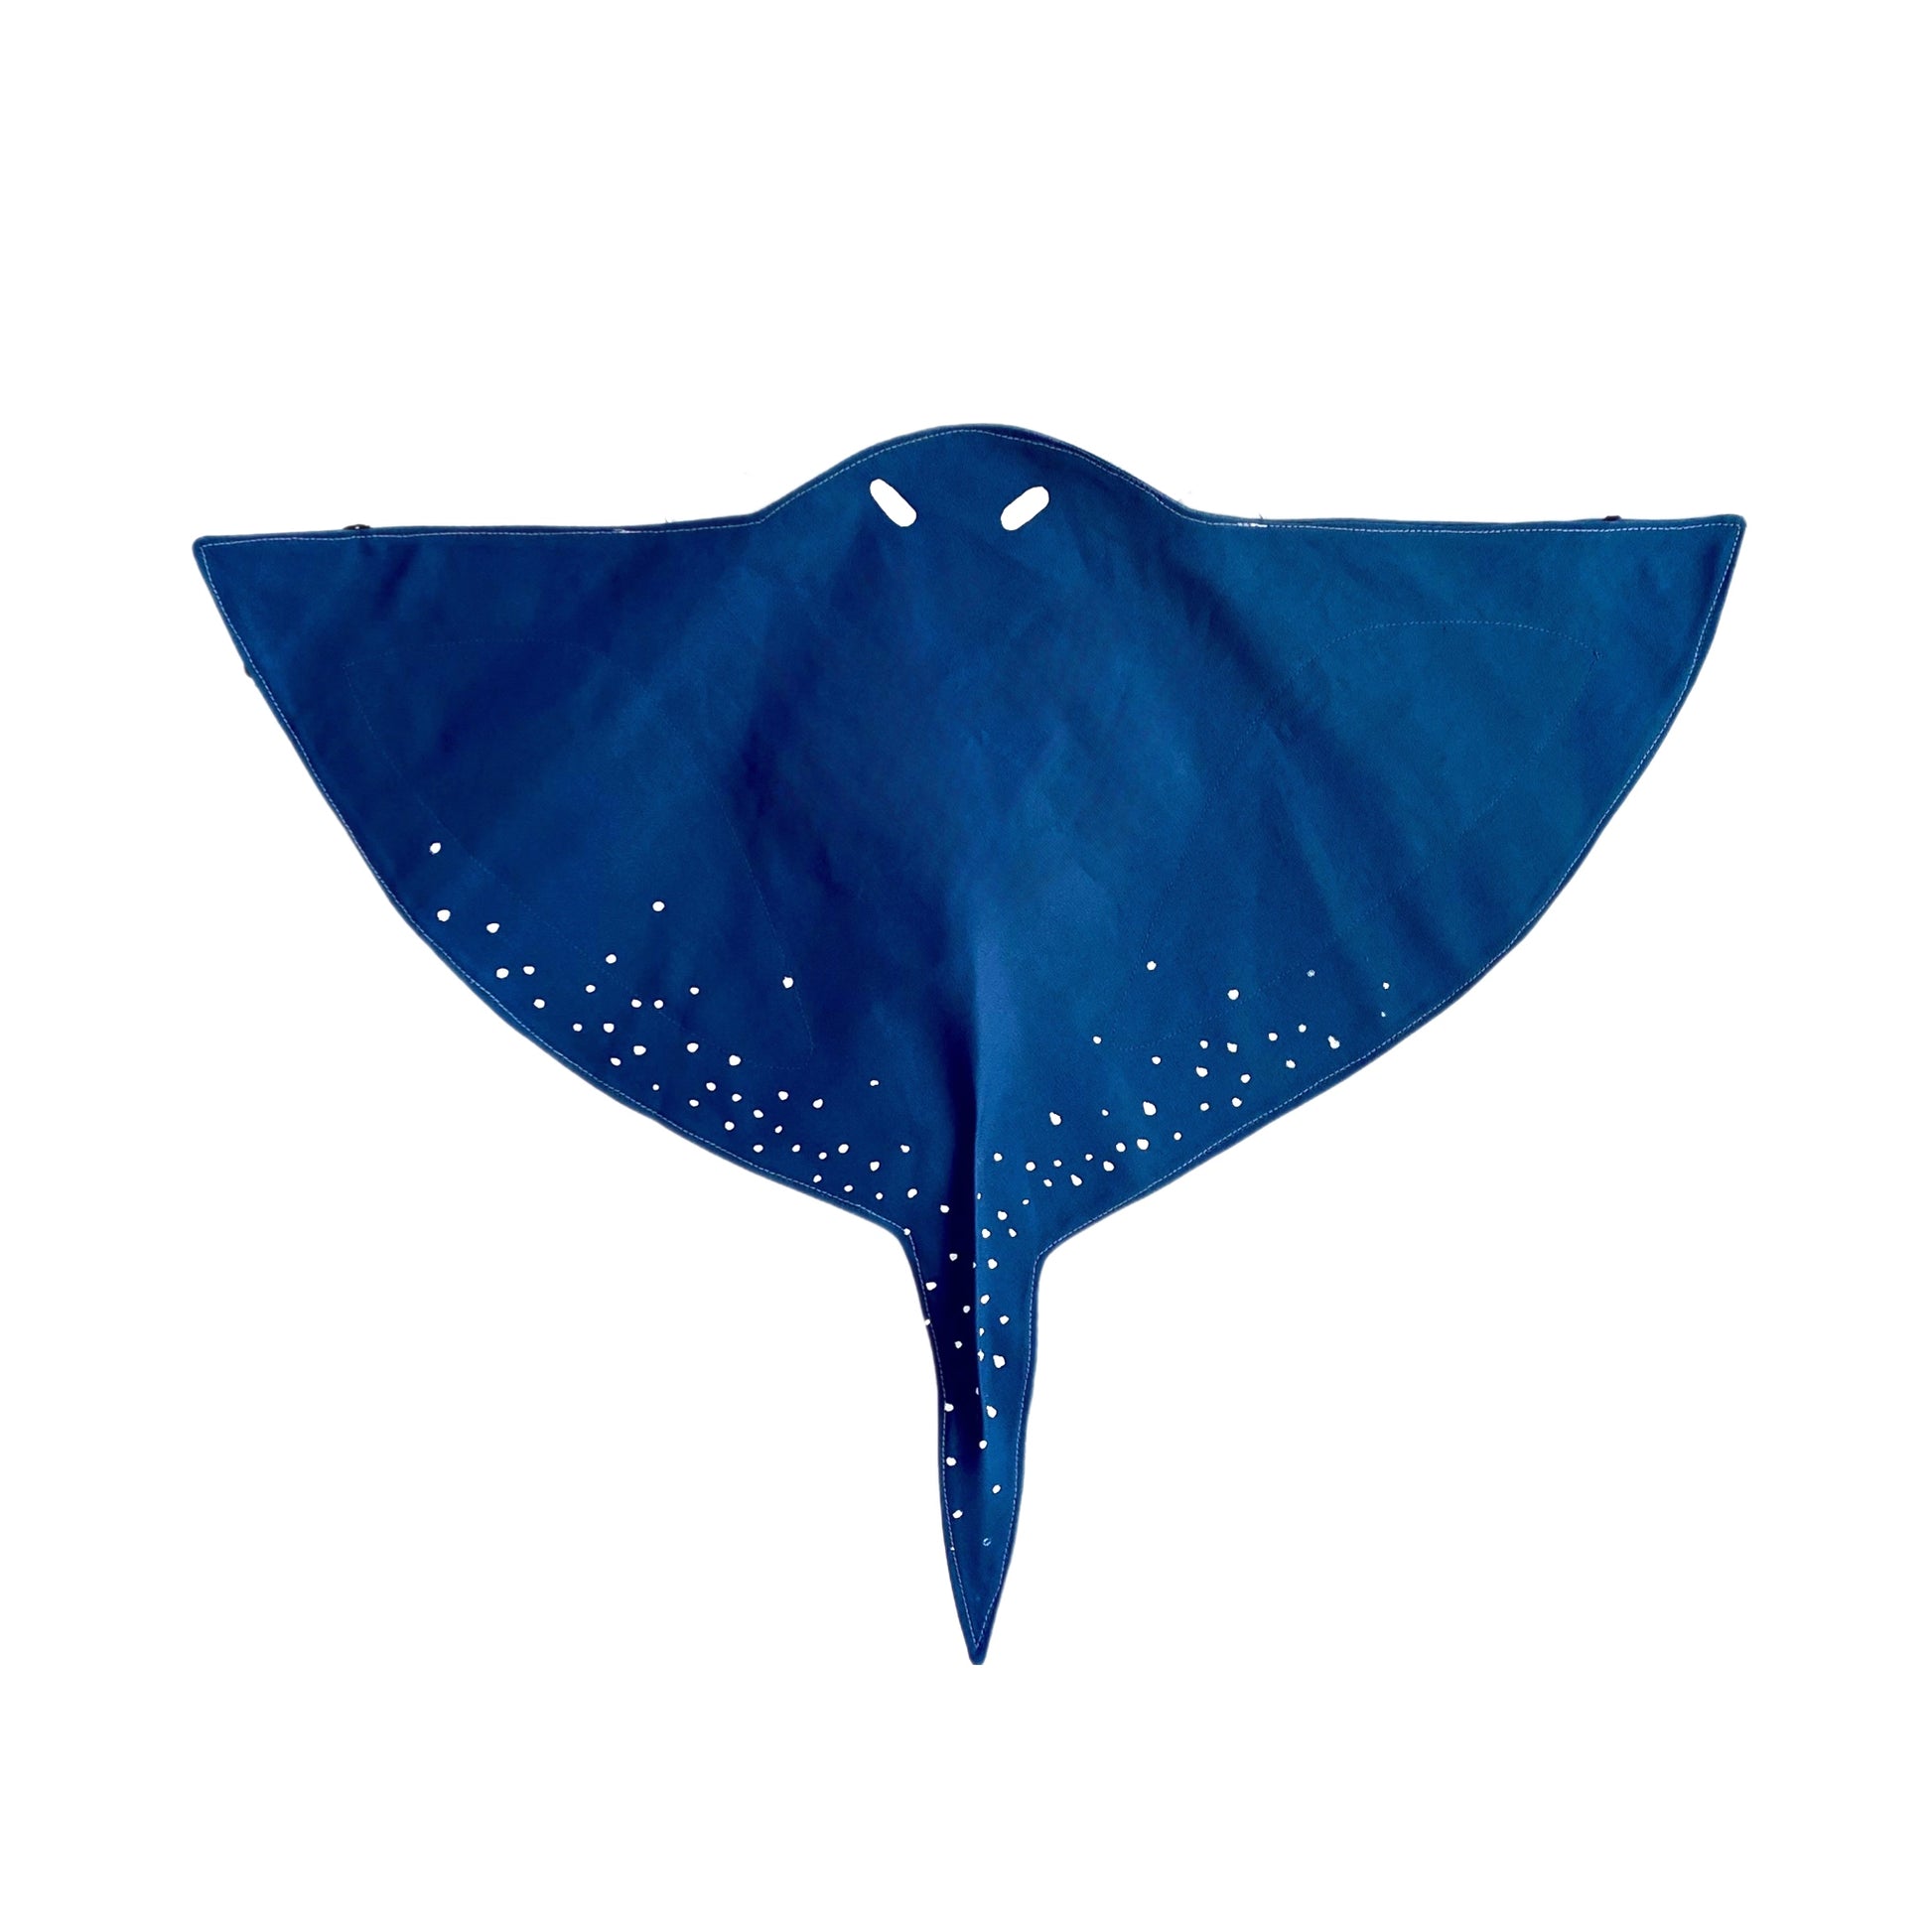 Stingray costume for Halloween and pretend play.